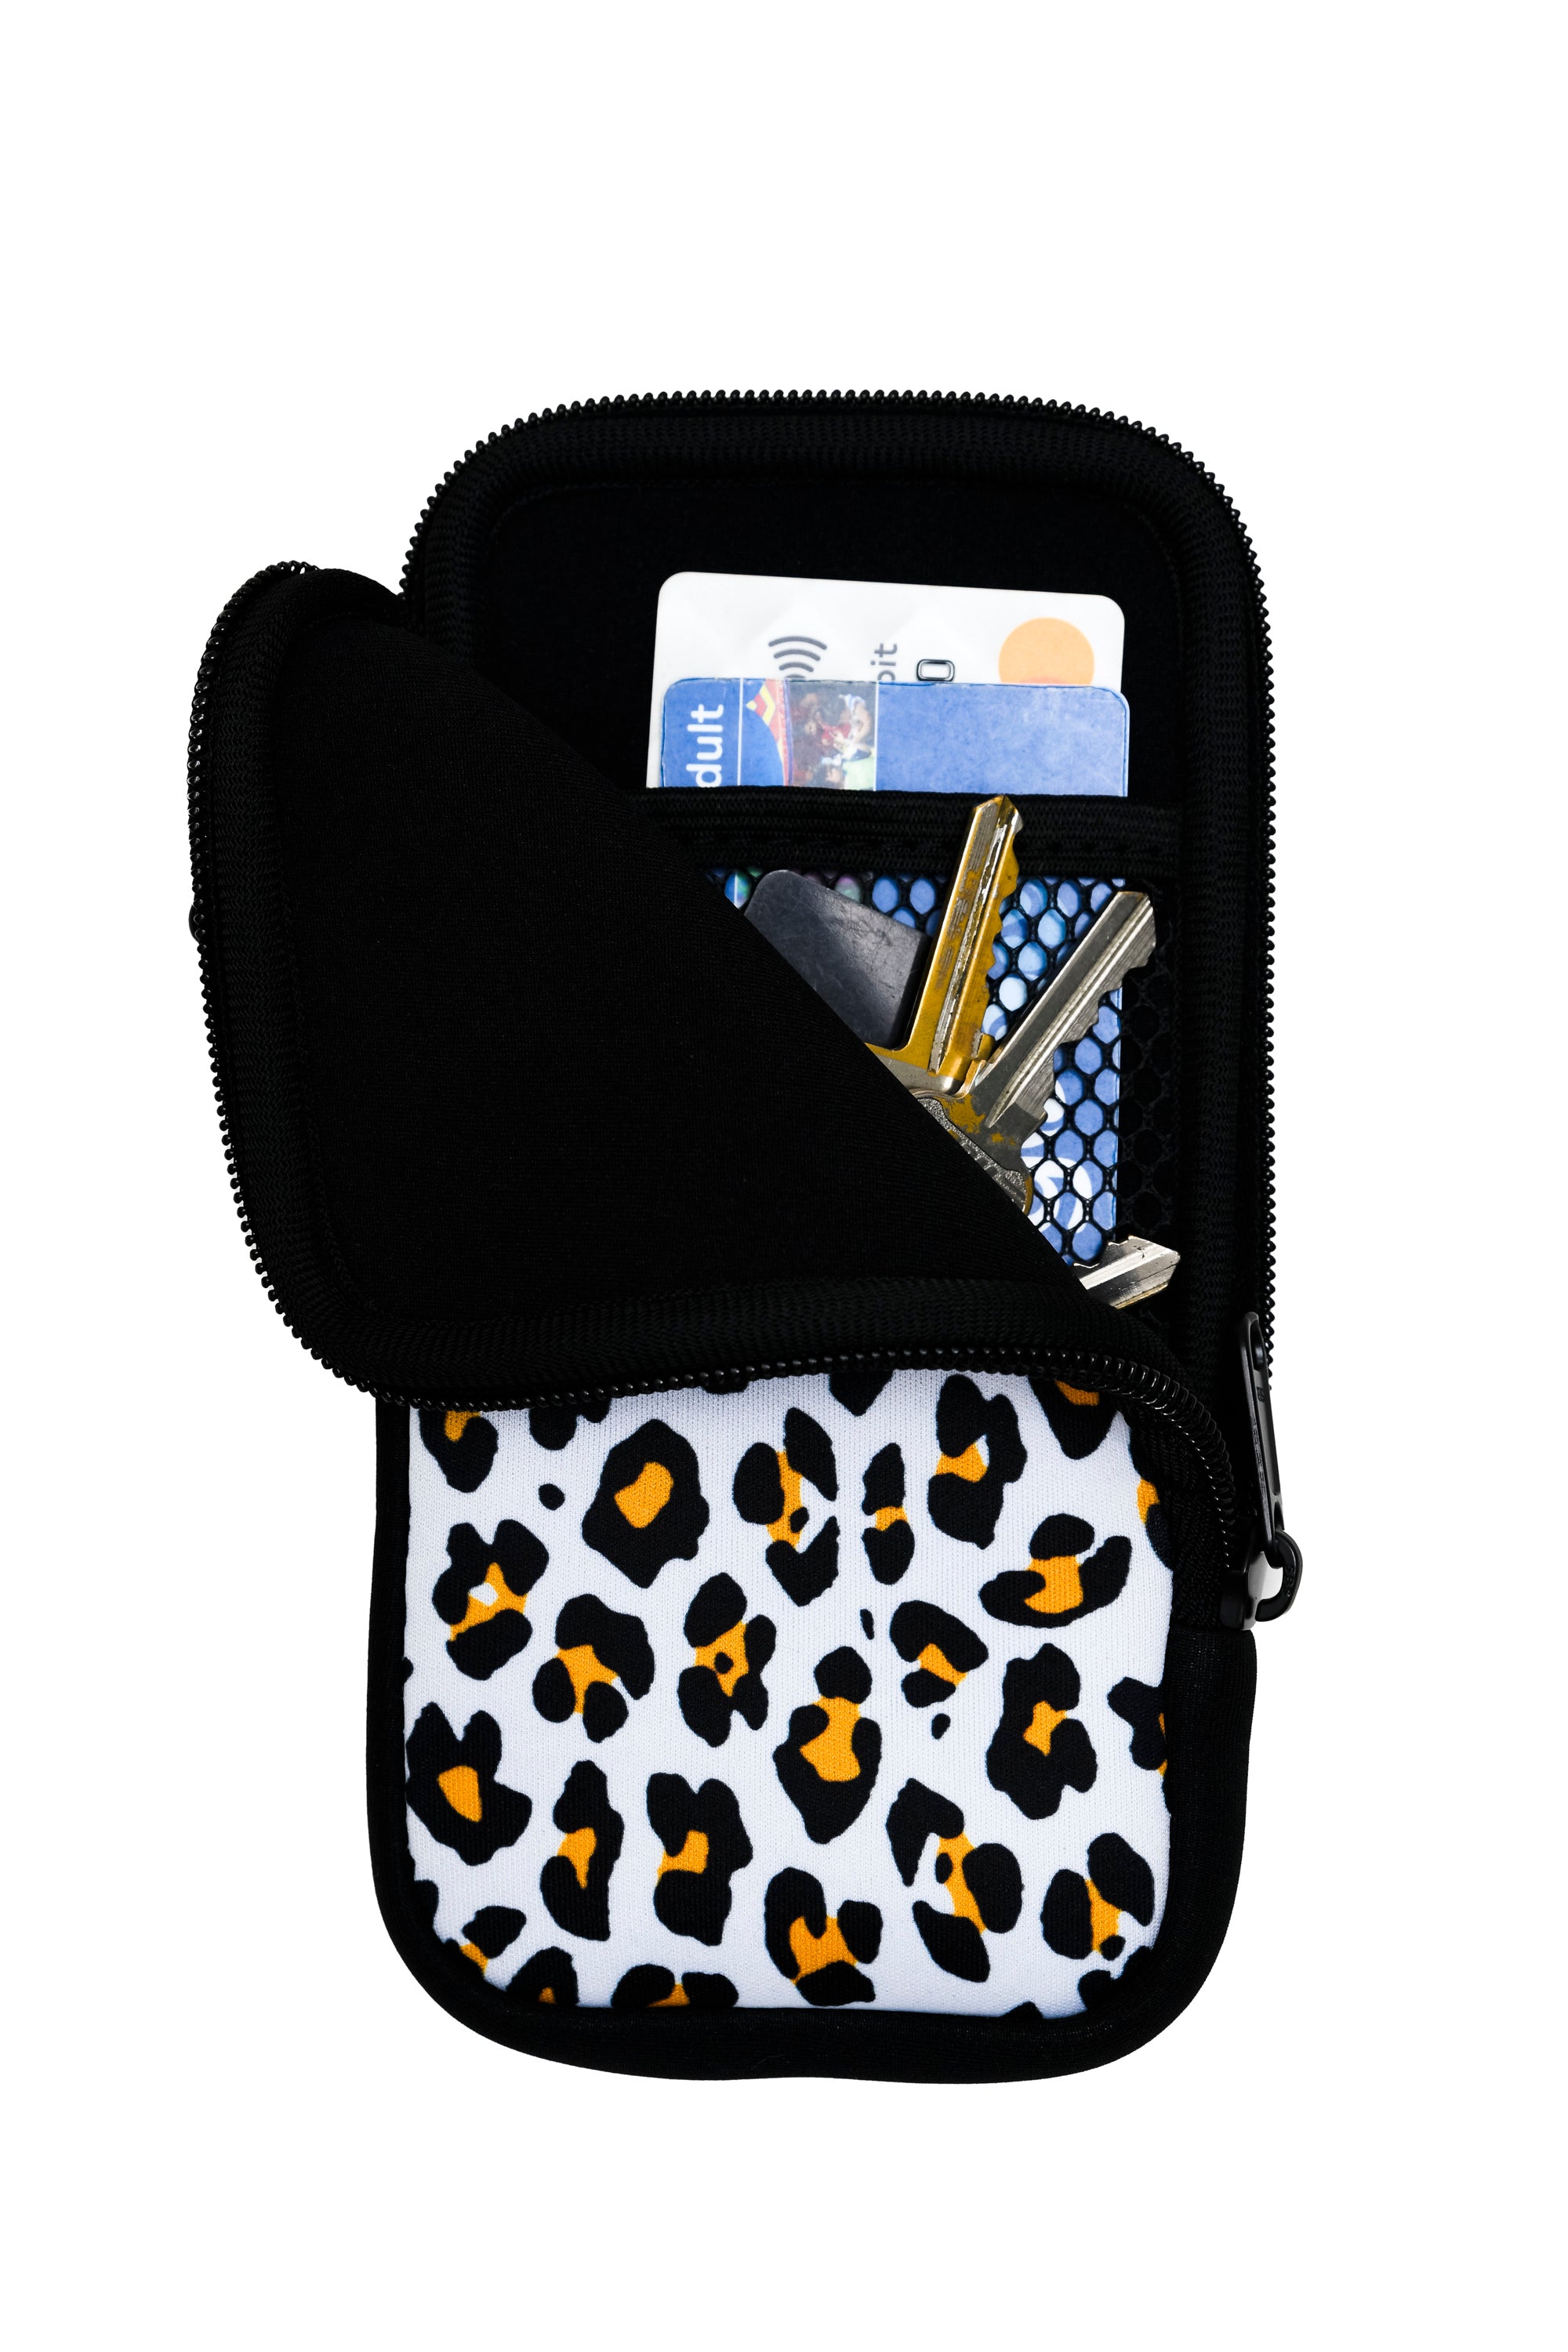 Travel Pouch with Detachable Lanyard - Leopard Print